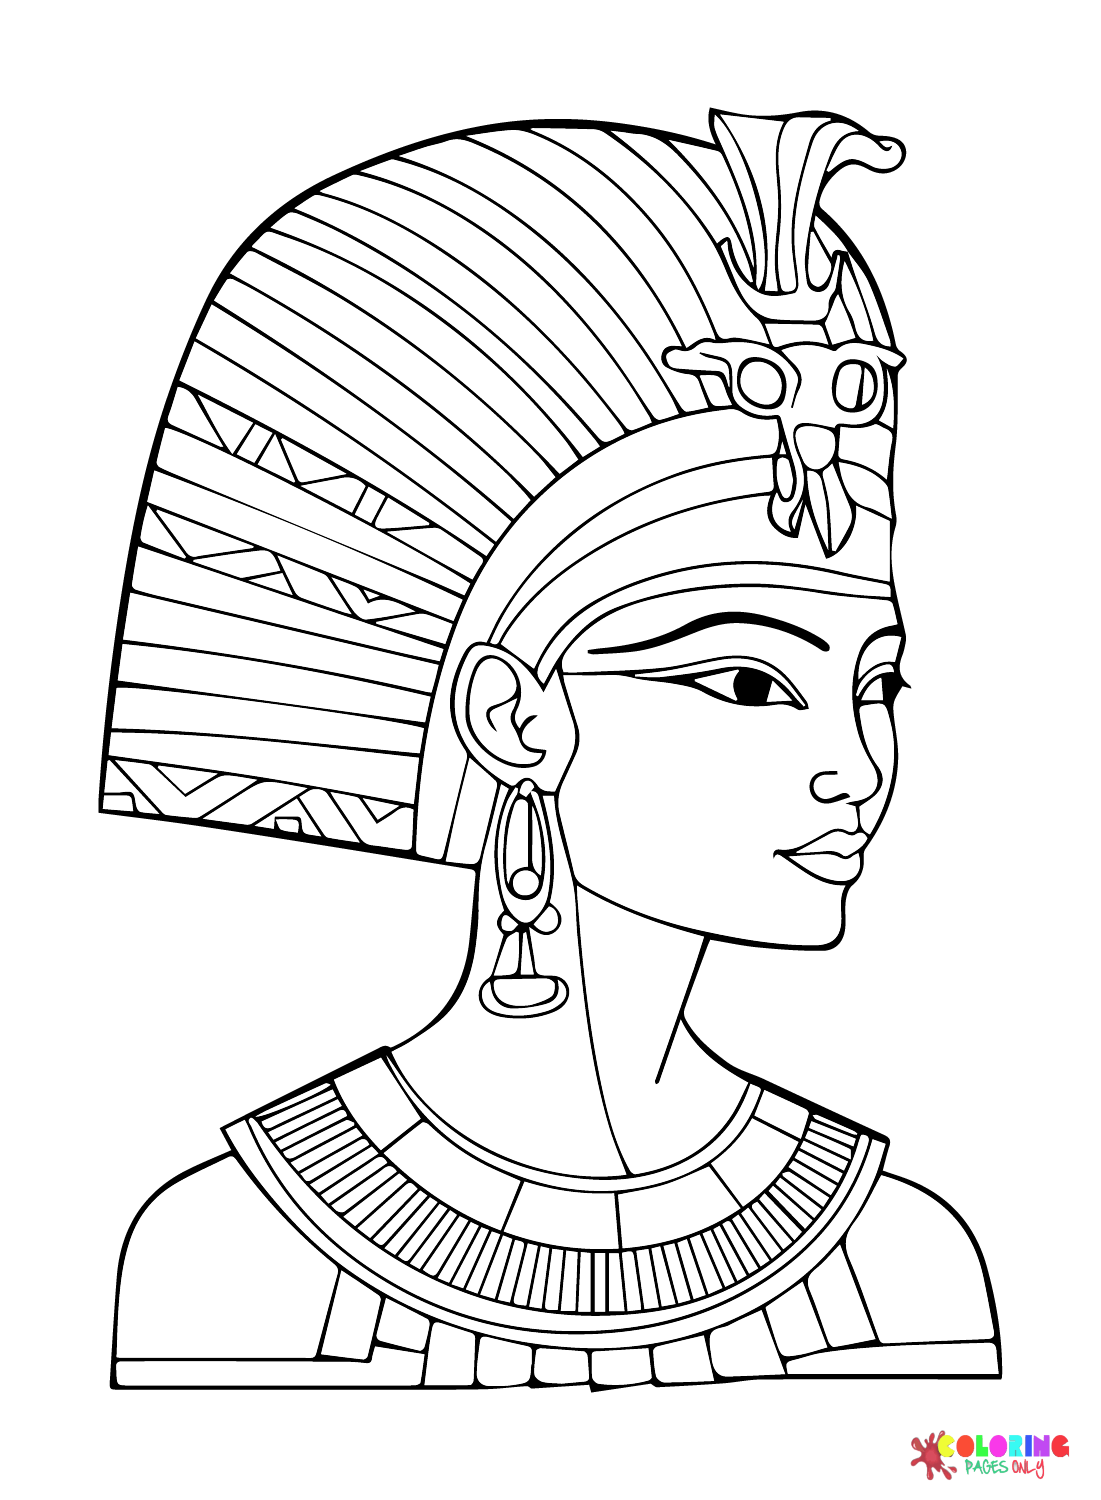 Art Ancient Egypt Coloring Page